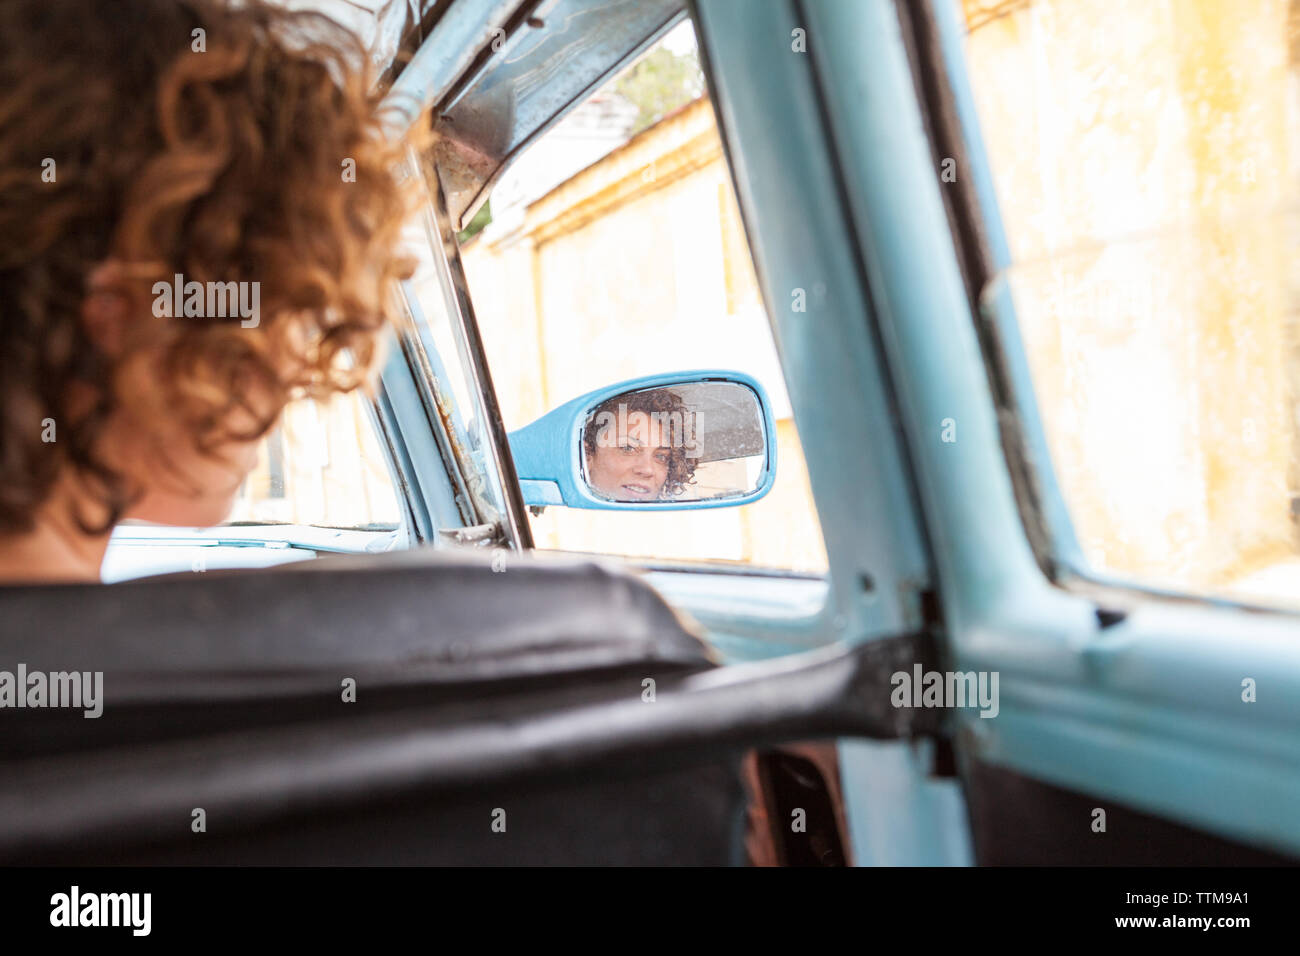 Western girl's face reflected in the wing mirror of vintage car, Cuba Stock Photo